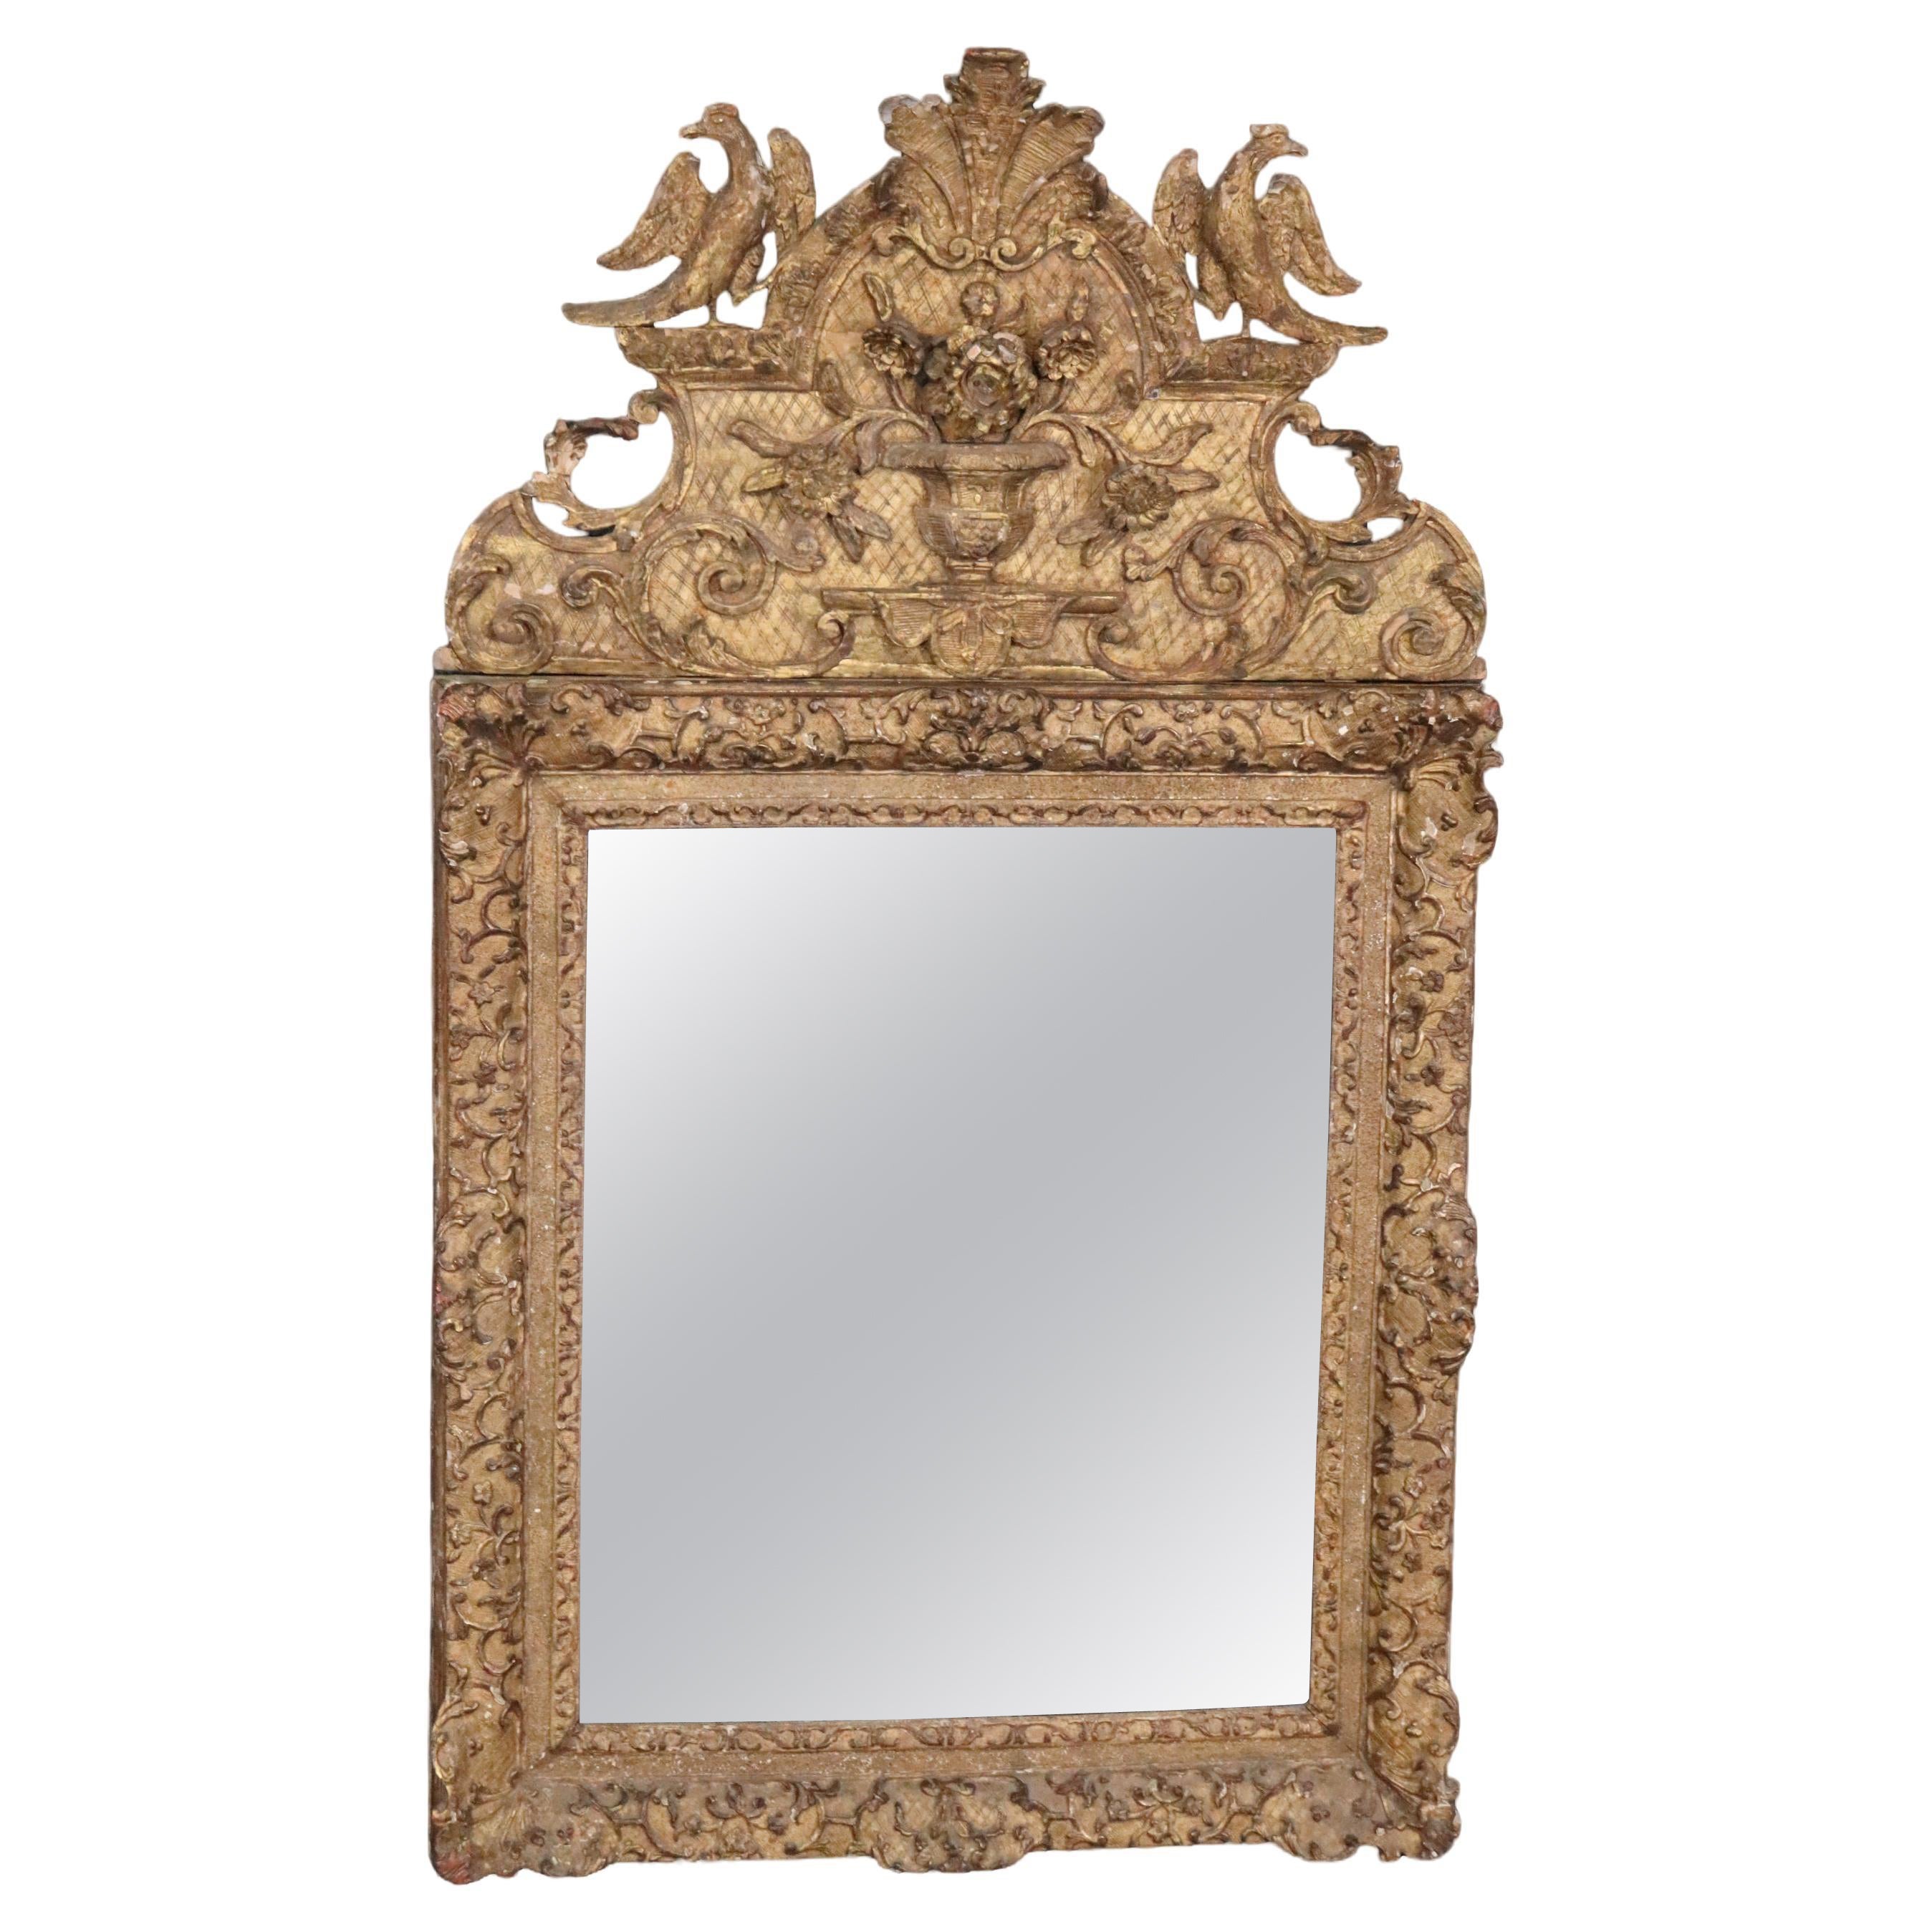 Very Rare early 18th Century Period French Louis XIV Giltwood Mirror with Birds For Sale